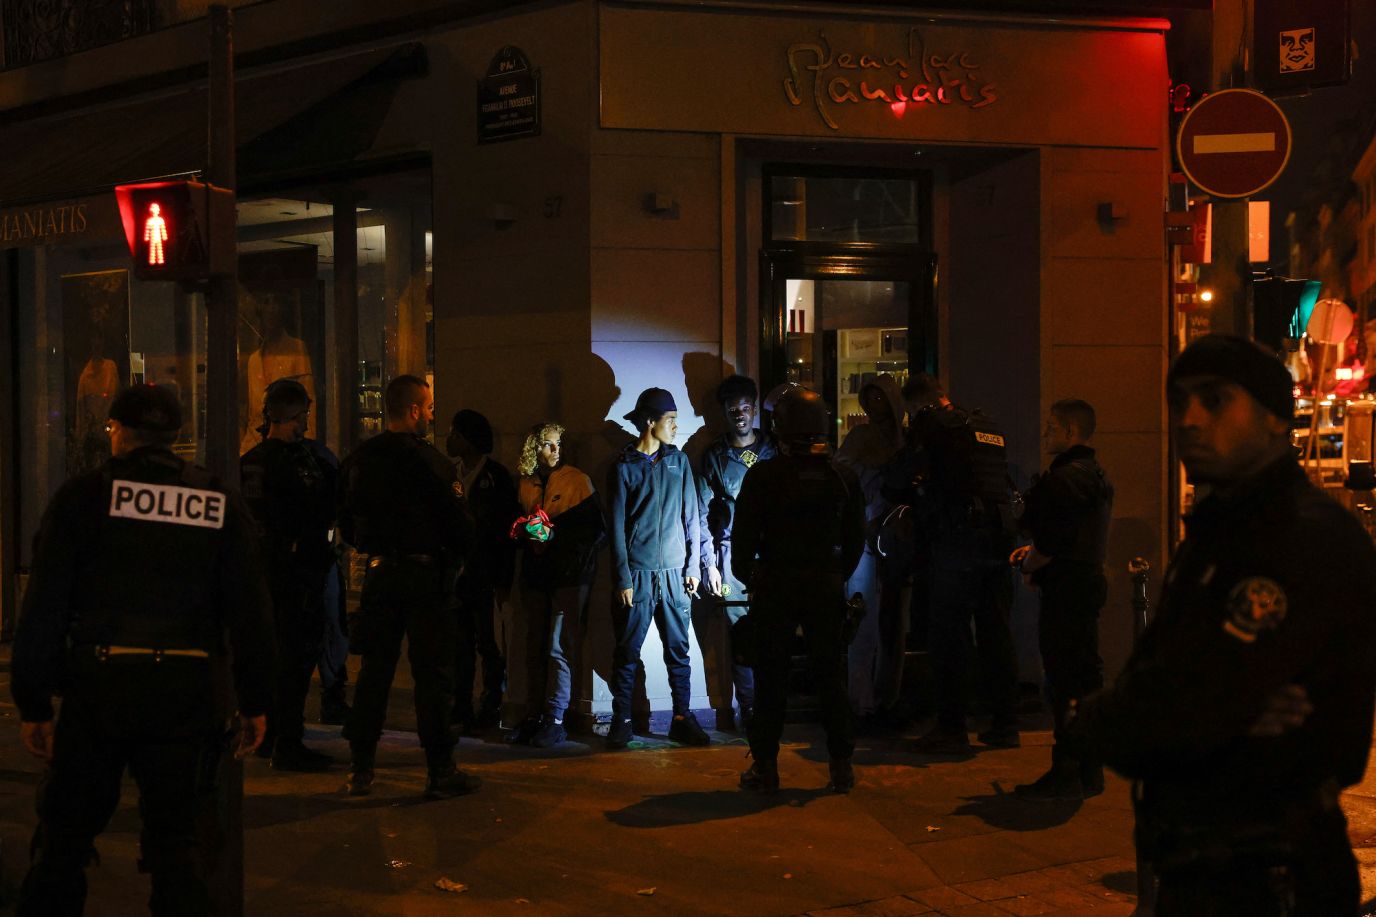 Police stop a group of young people in the Champs-Élysées area in Paris on July 2.